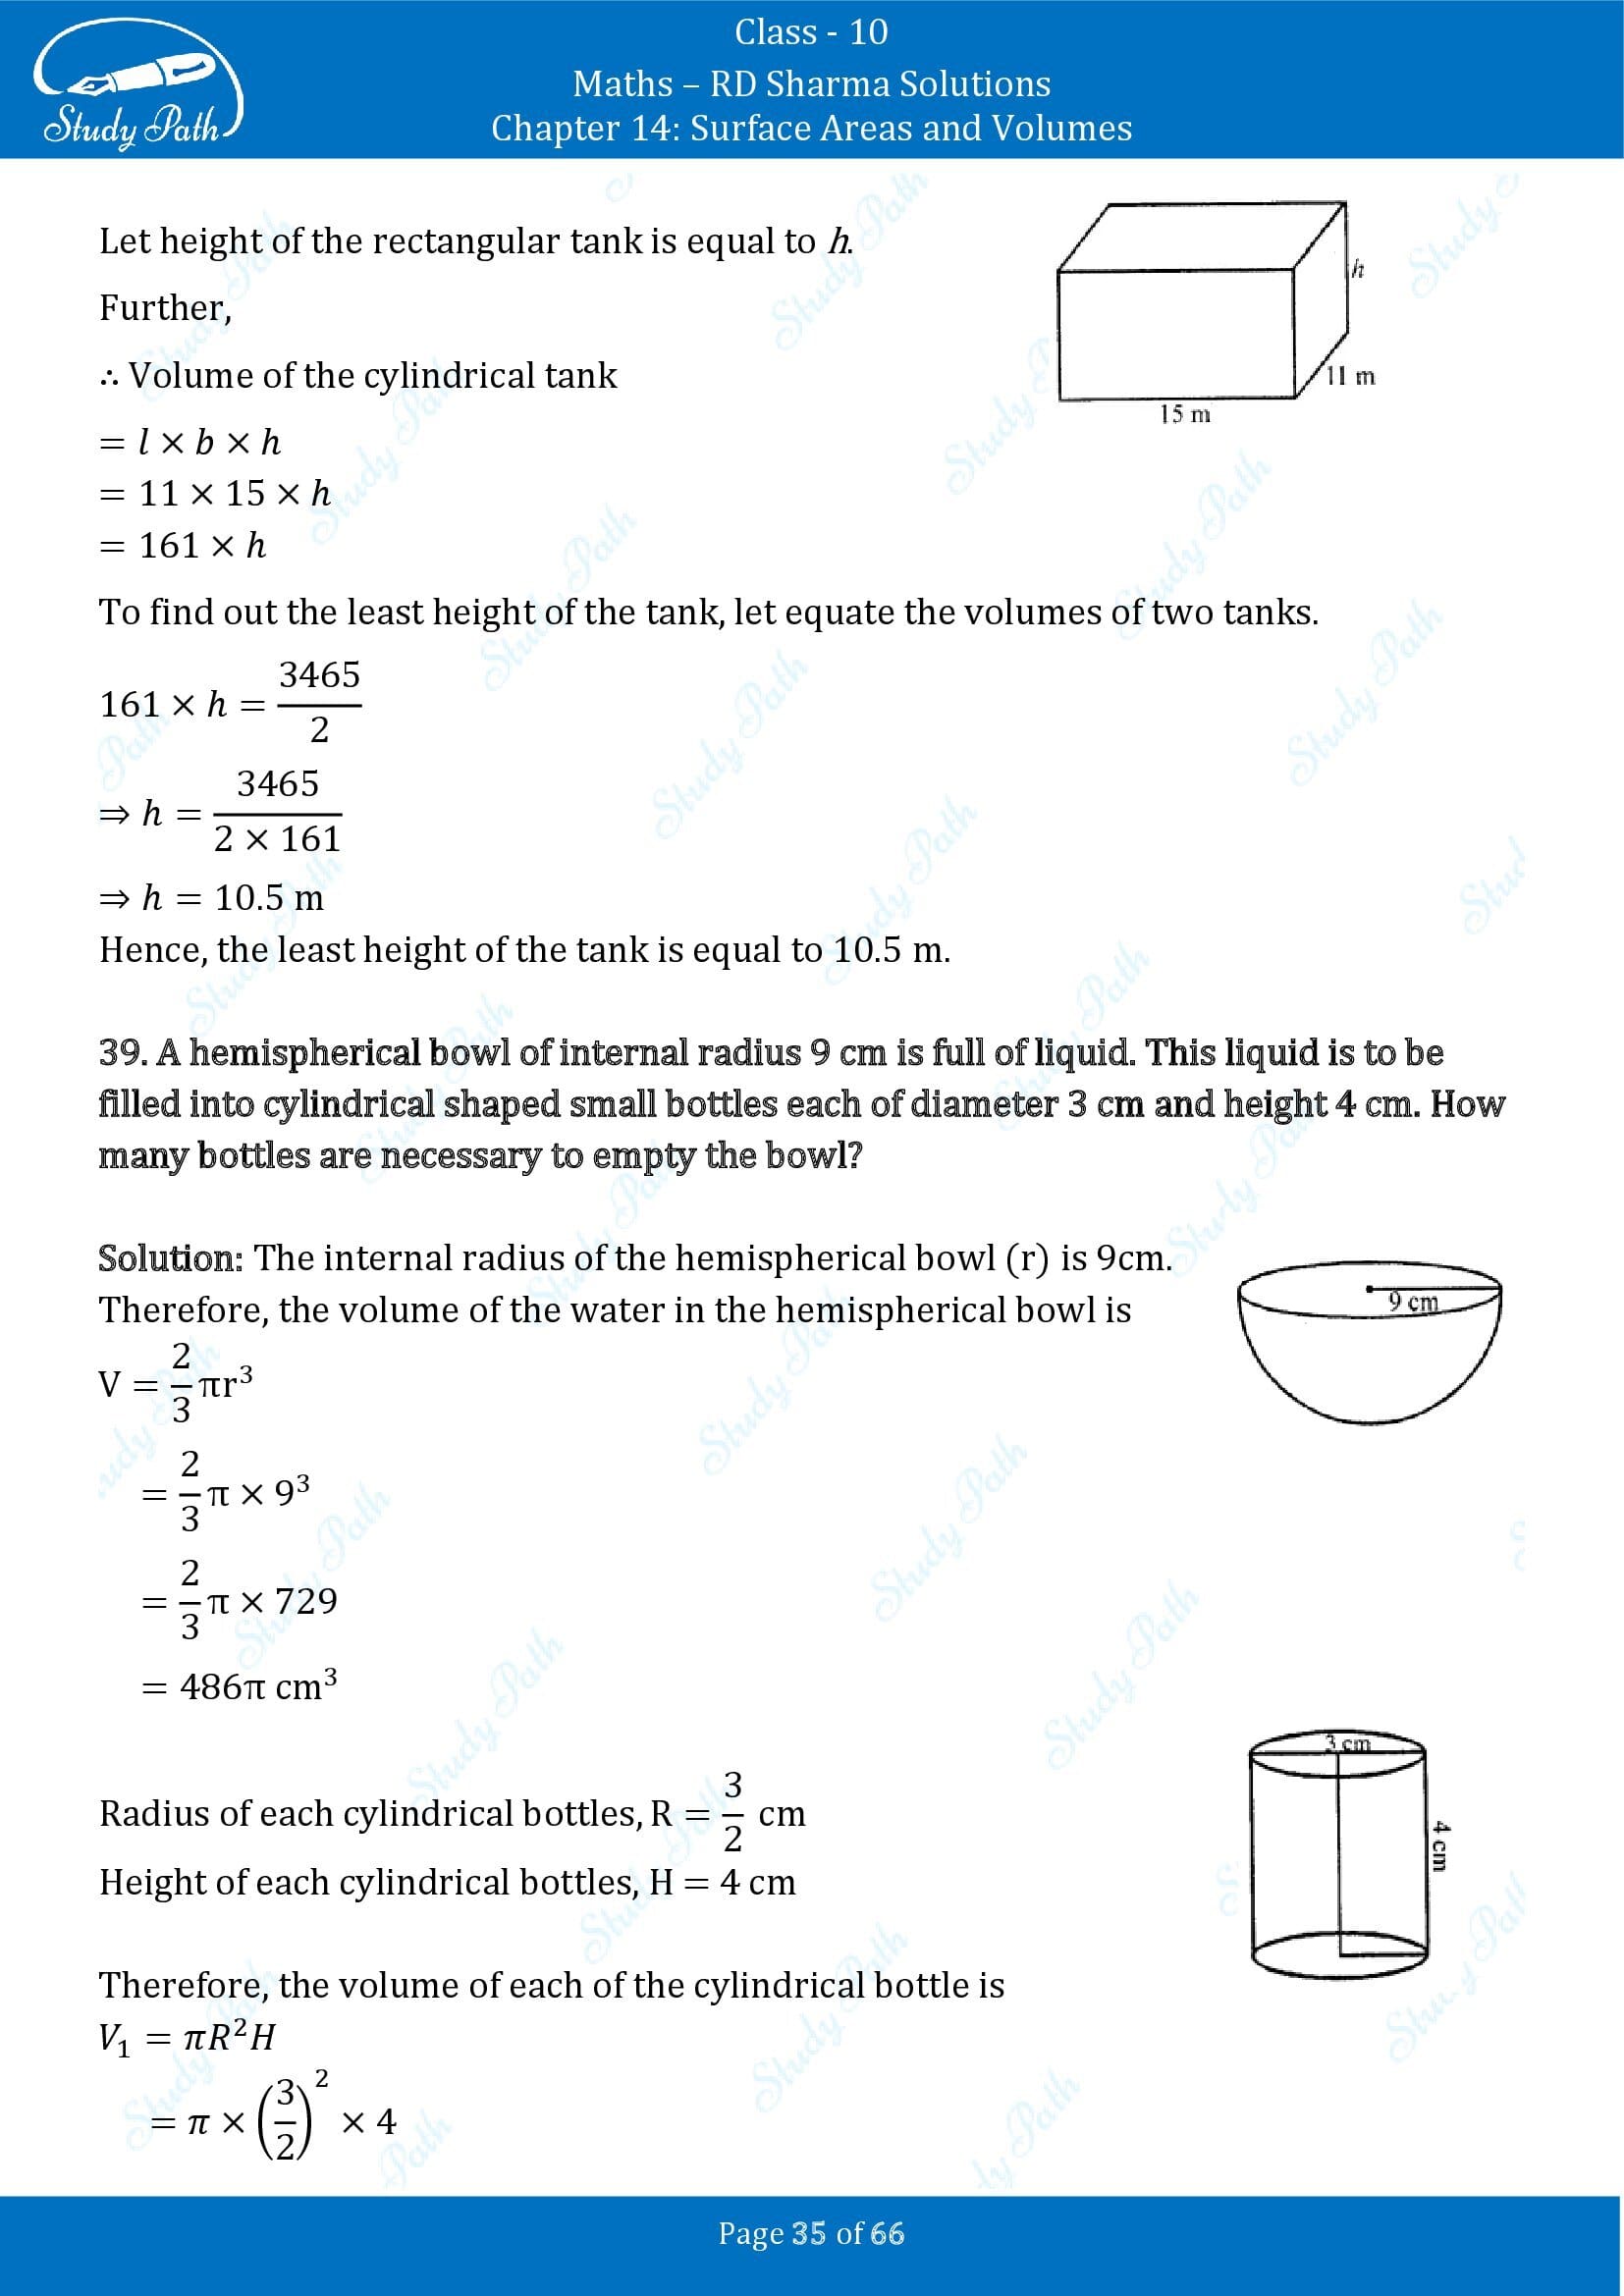 RD Sharma Solutions Class 10 Chapter 14 Surface Areas and Volumes Exercise 14.1 00035